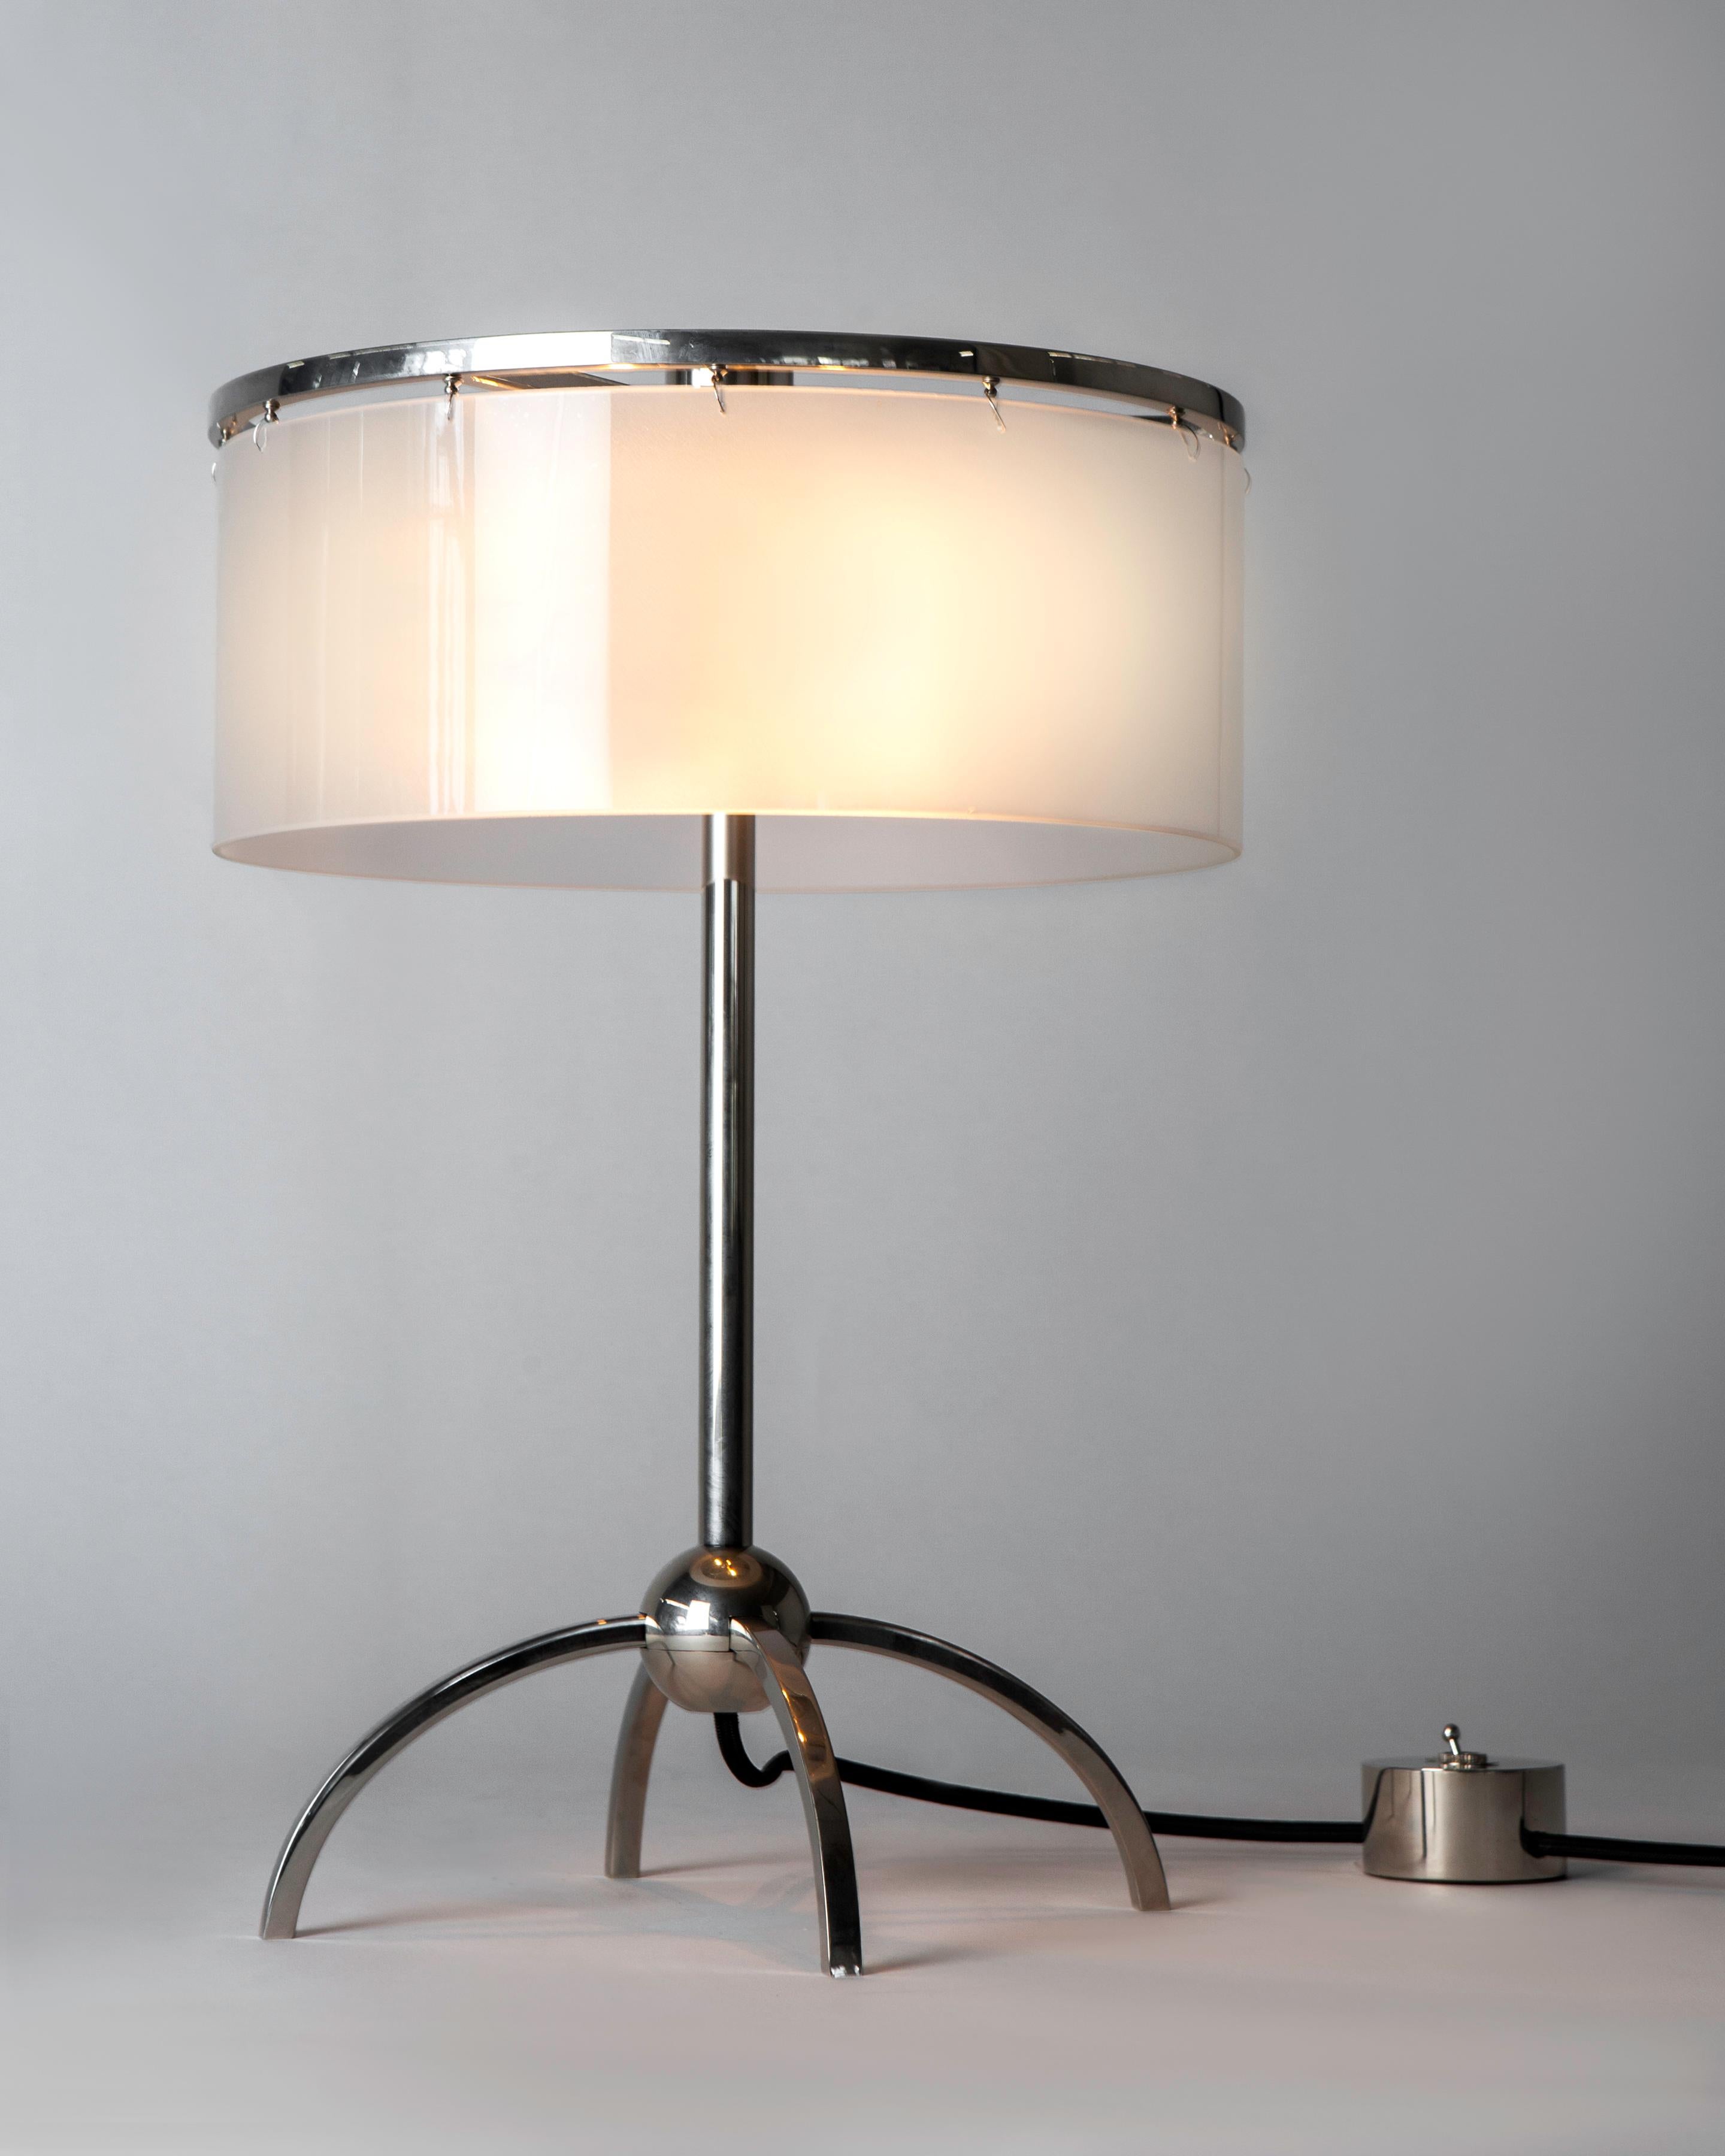 RTL5010
A modern table lamp having a slender round stem connecting to a round ball base with four curved square-sectioned legs. The frosted glass drum shade floats below a minimal circular top frame, obscuring a two light cluster. A decorative